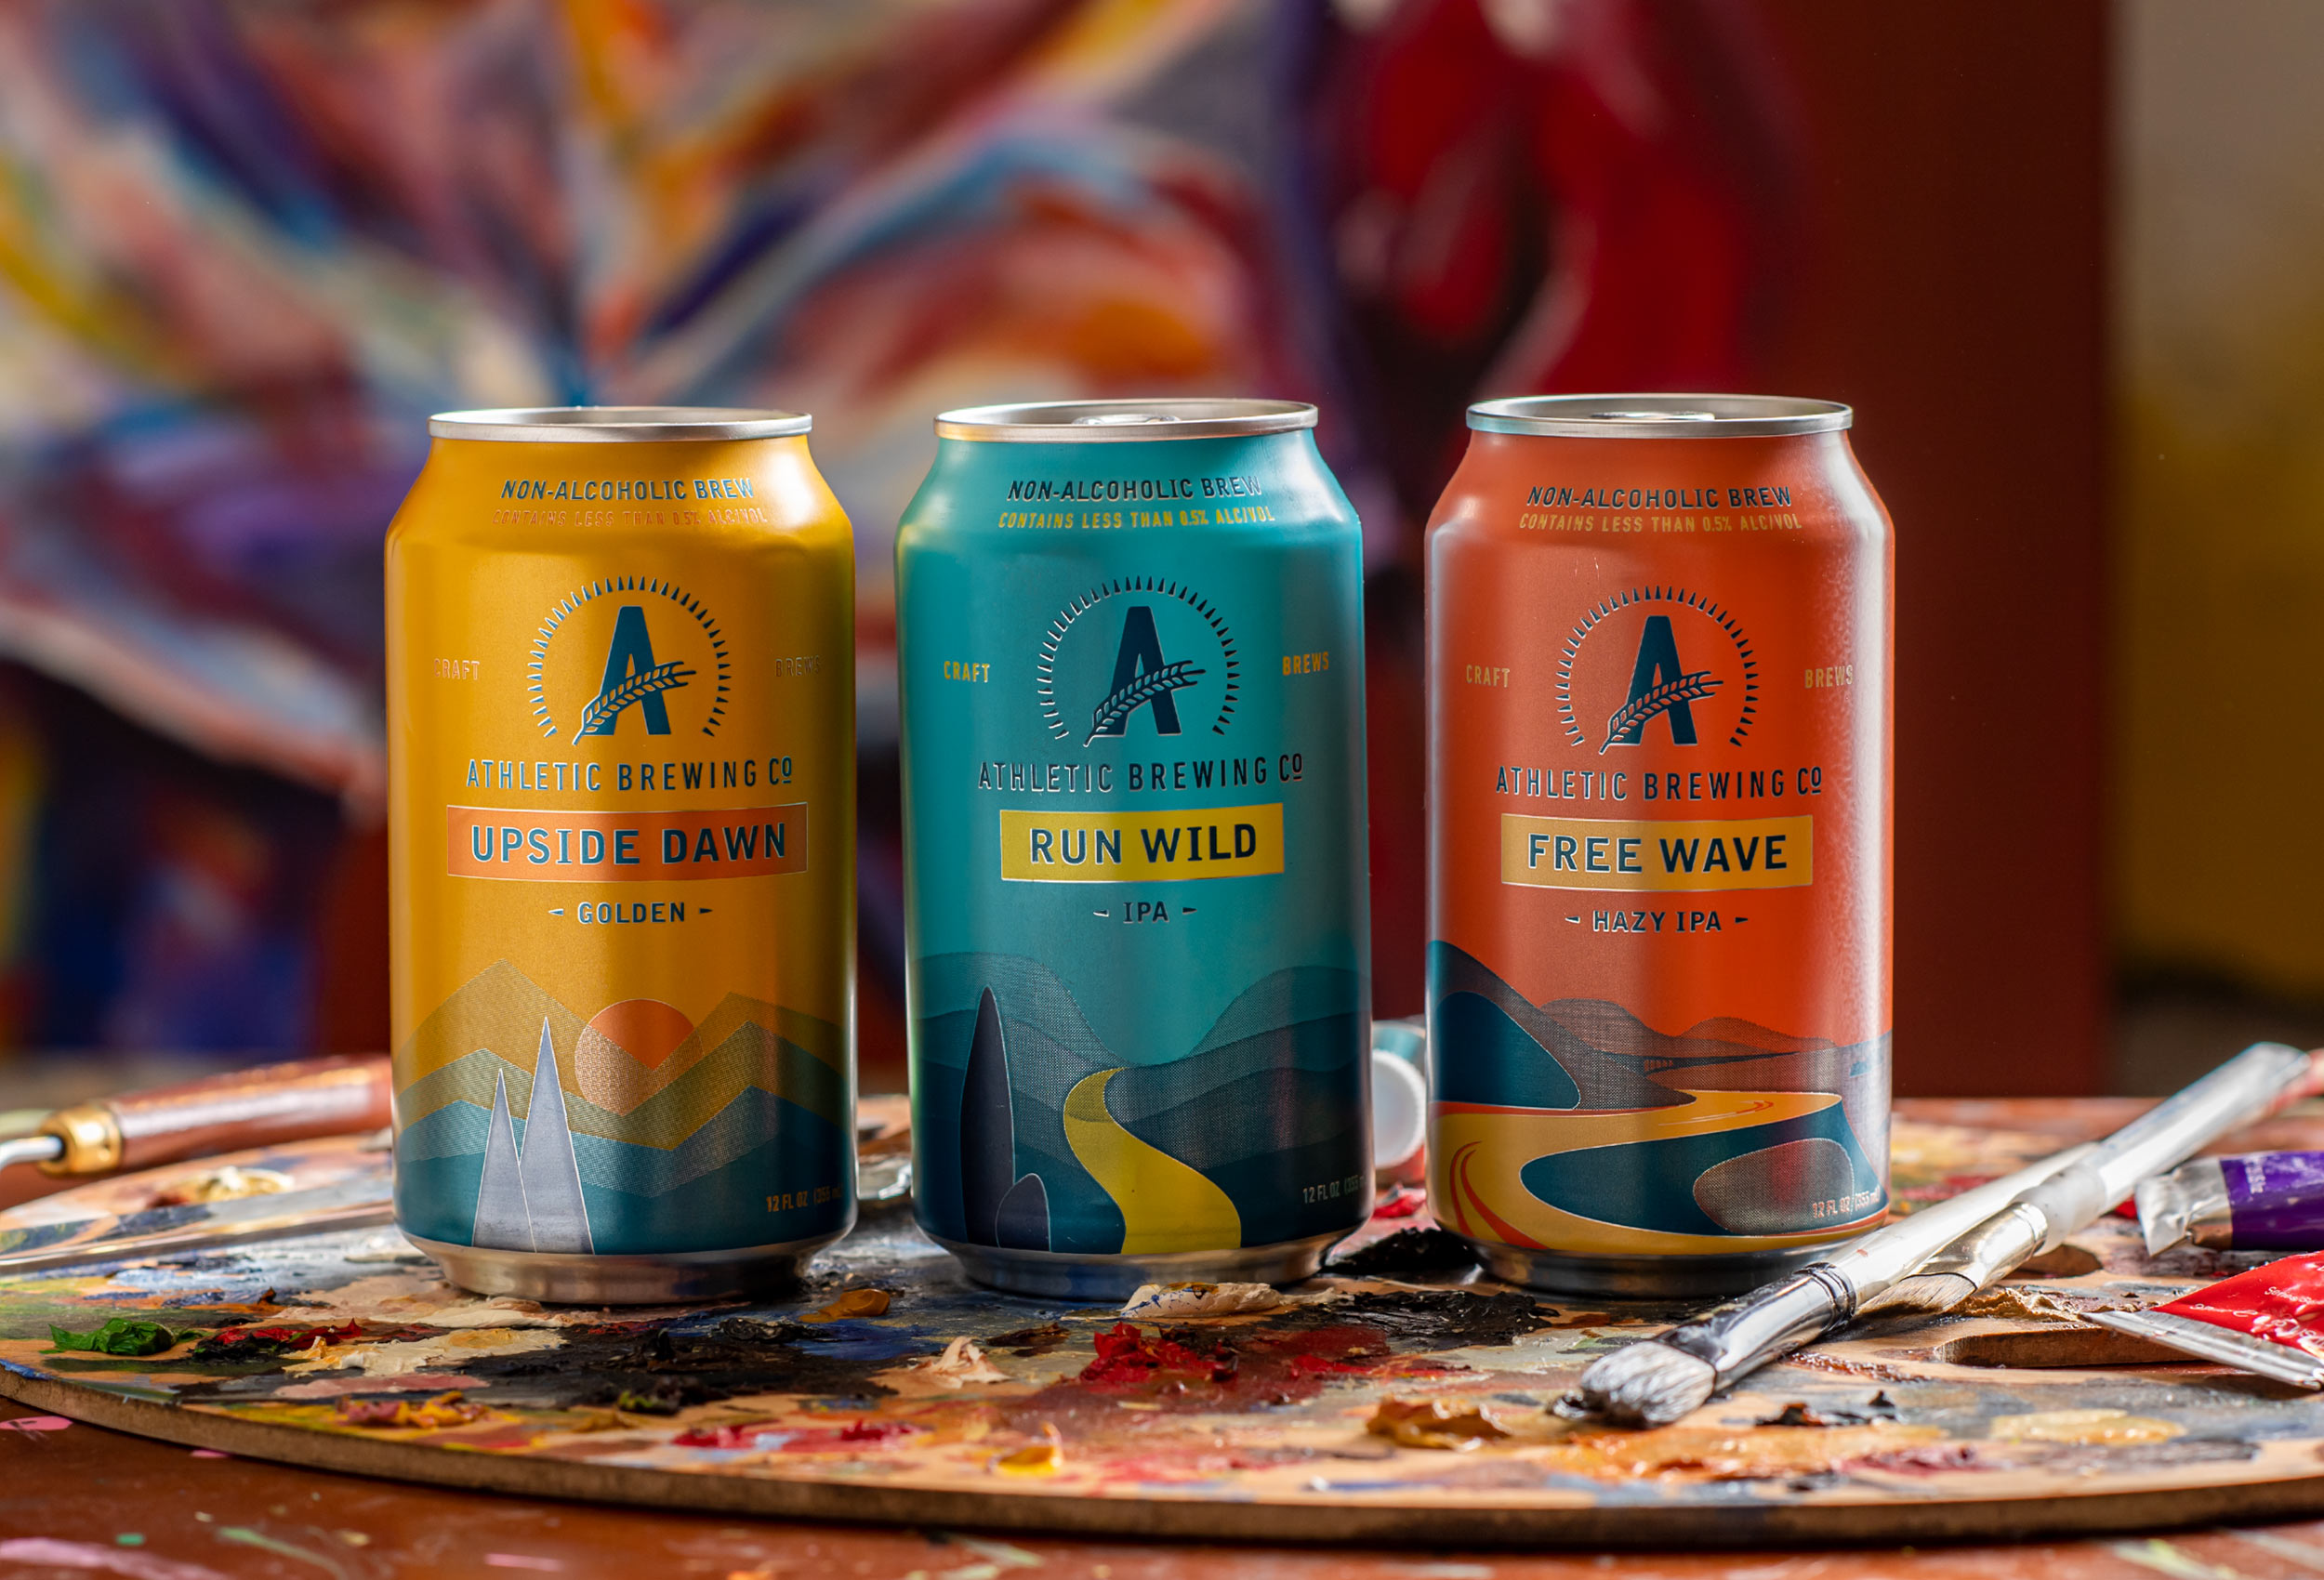 Upside Dawn, Run Wild and Free Wave cans of non-alcholic beer - product advertising photography for Athletic Brewing Co.